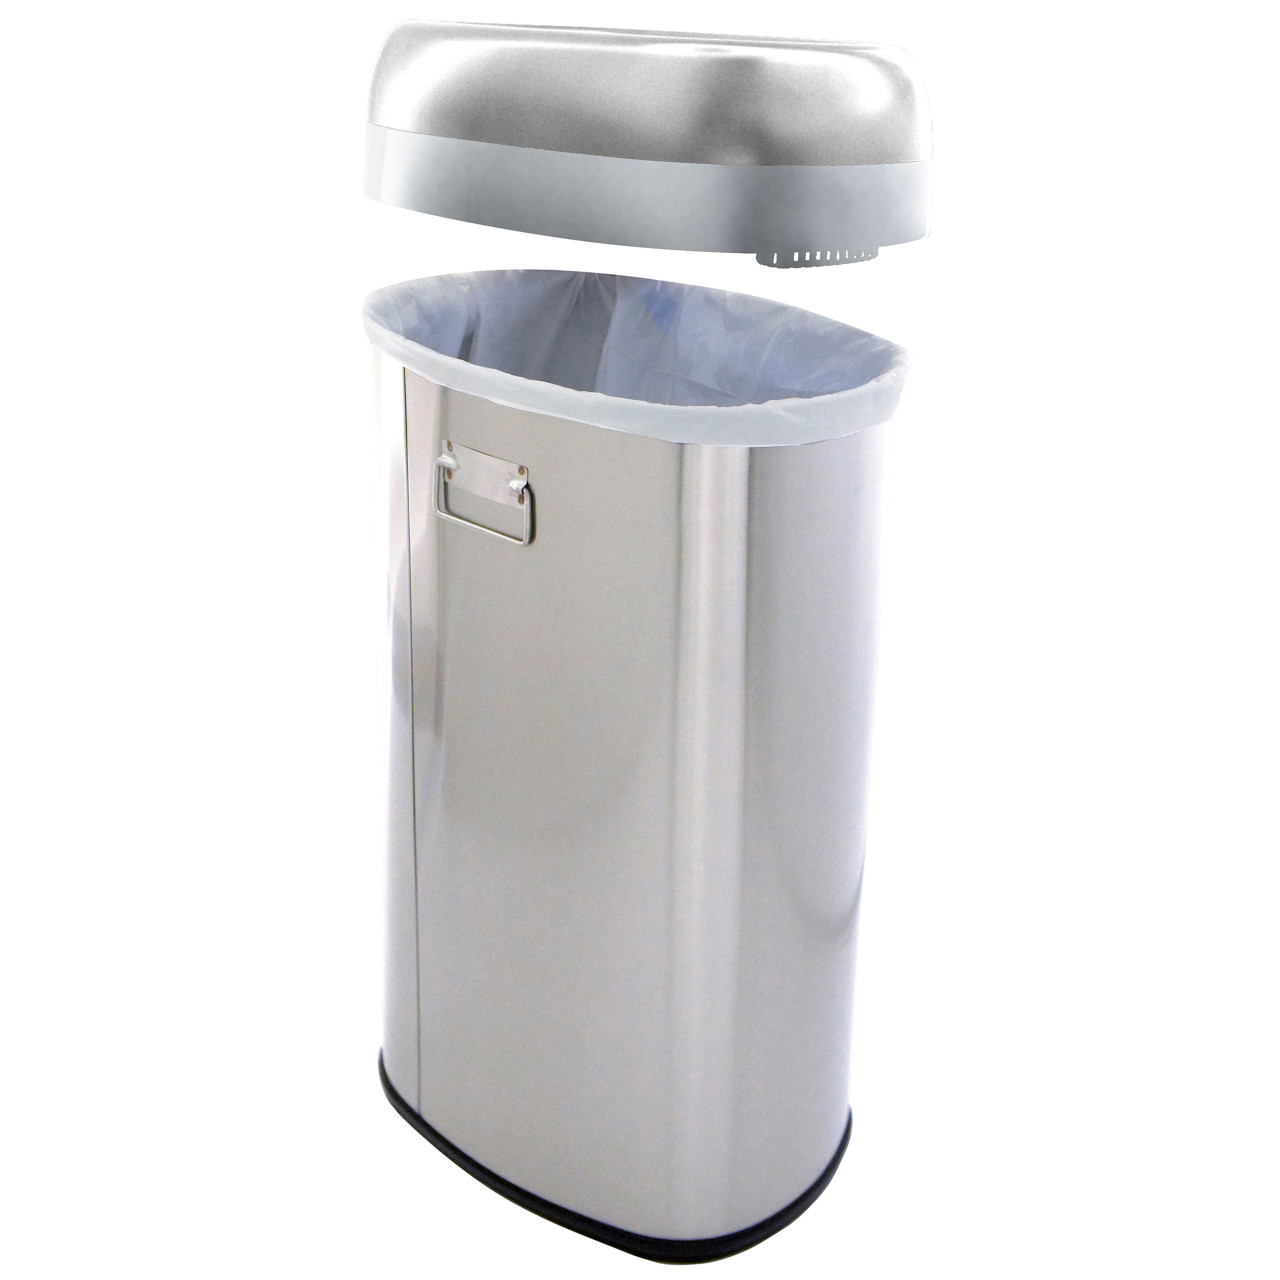 Keep High Traffic Areas Clean with HLS 13 Gallon Open Top Trash Can